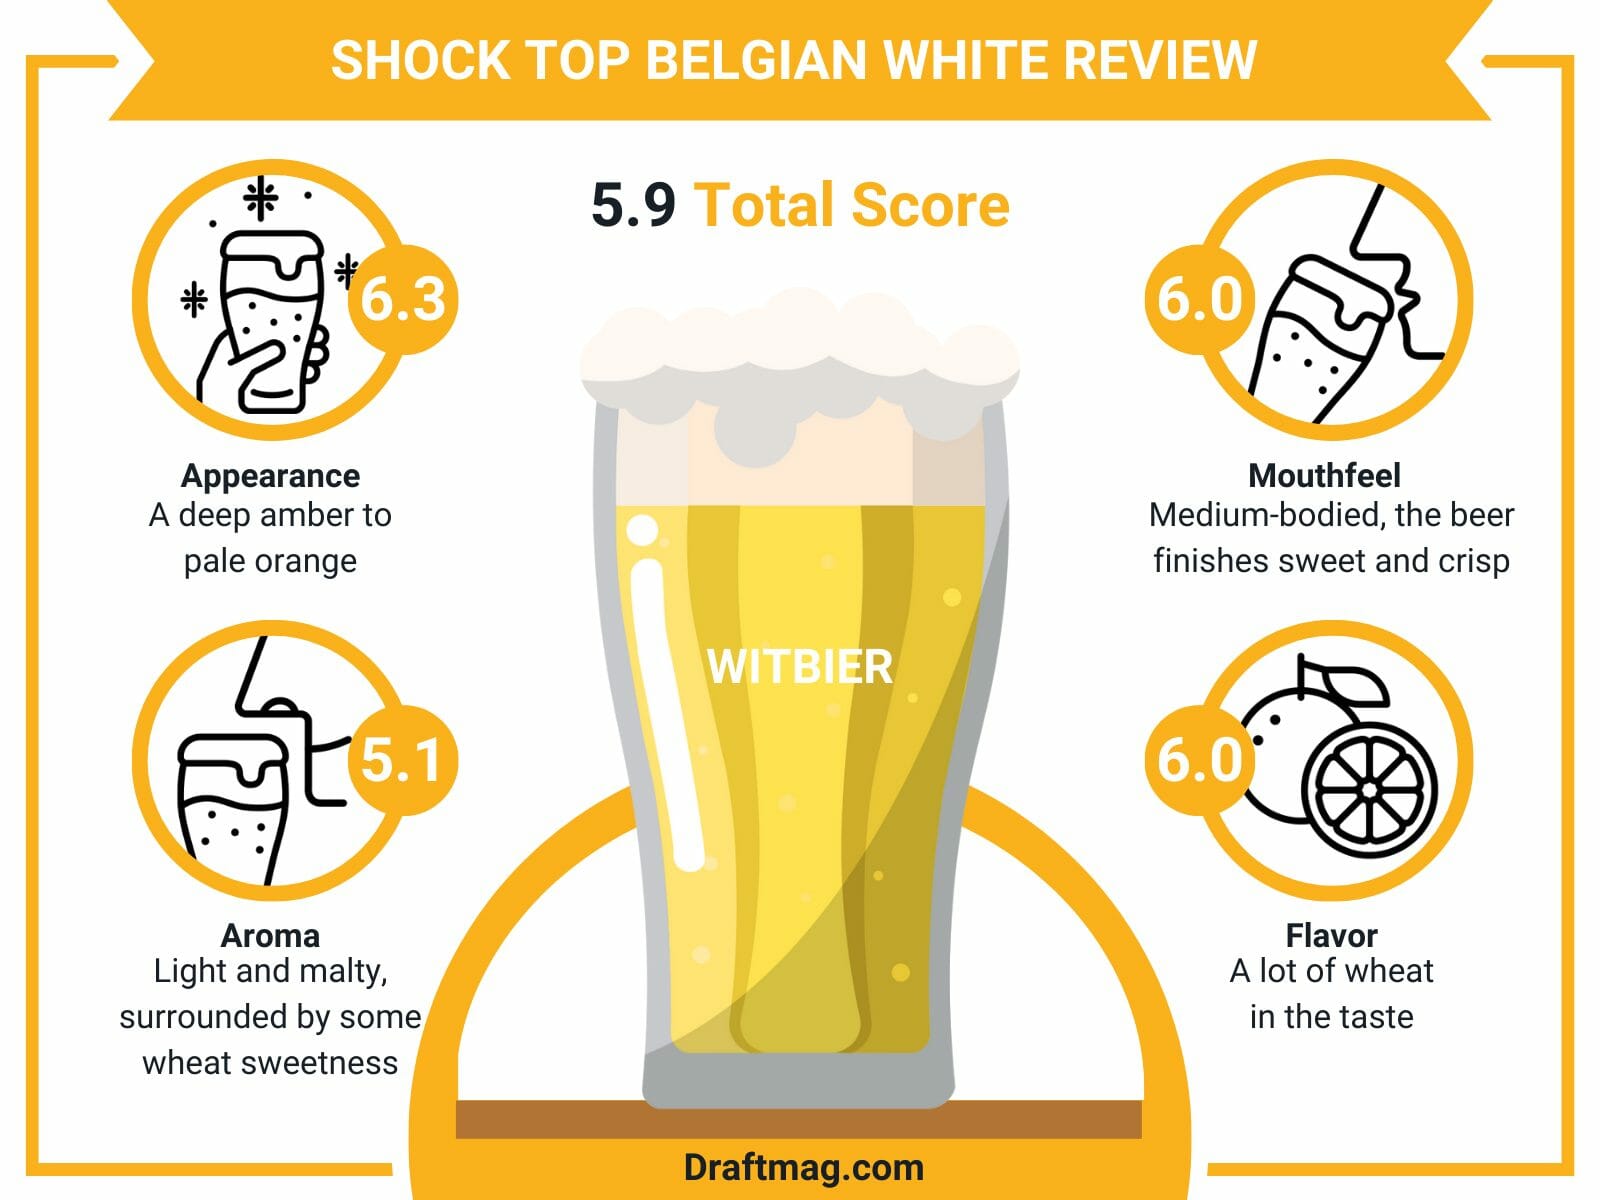 Shock top belgian white review infographic